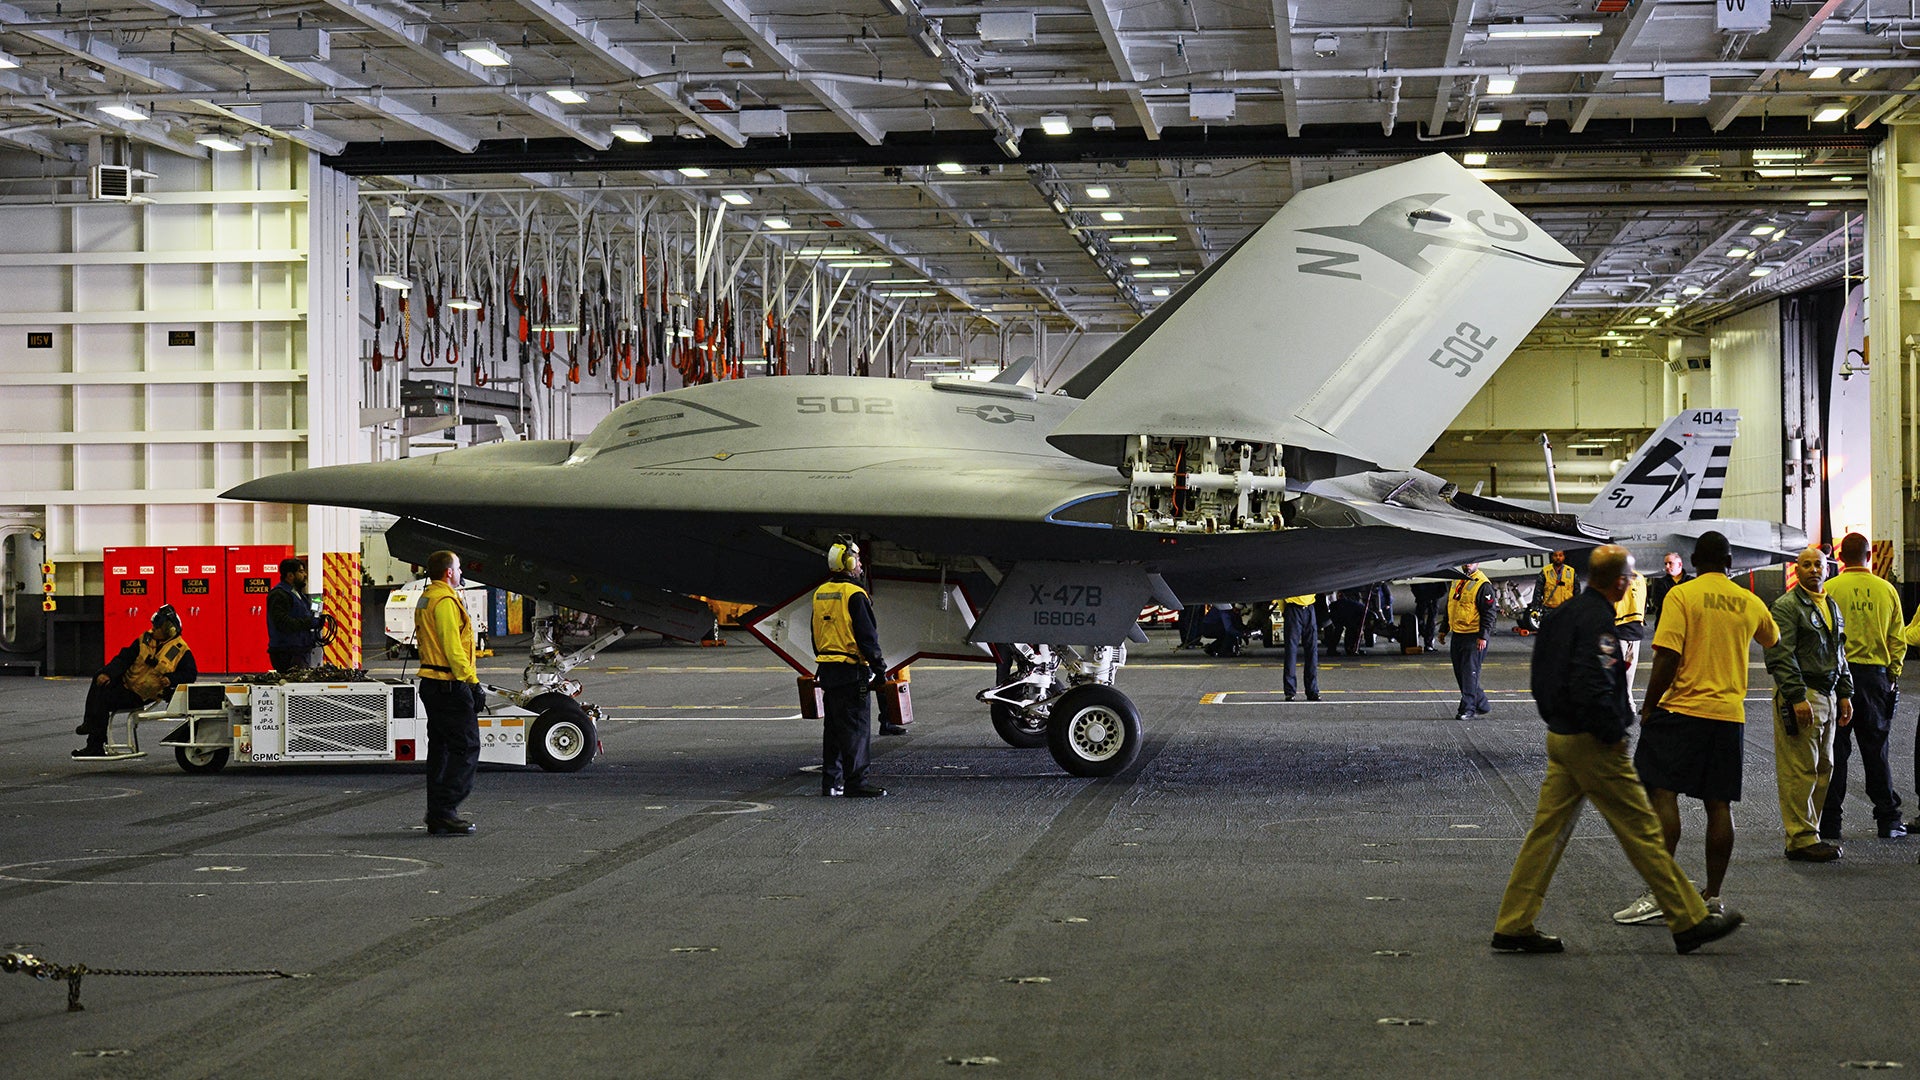 130514-N-TB177-025
ATLANTIC OCEAN (May 14, 2013) An X-47B Unmanned Combat Air System (UCAS) demonstrator aircraft is transported in the hangar bay of the aircraft carrier USS George H.W. Bush (CVN 77). George H.W. Bush is conducting training operations in the Atlantic Ocean. (U.S. Navy photo by Mass Communication Specialist 3rd Class Kevin J. Steinberg/Released)